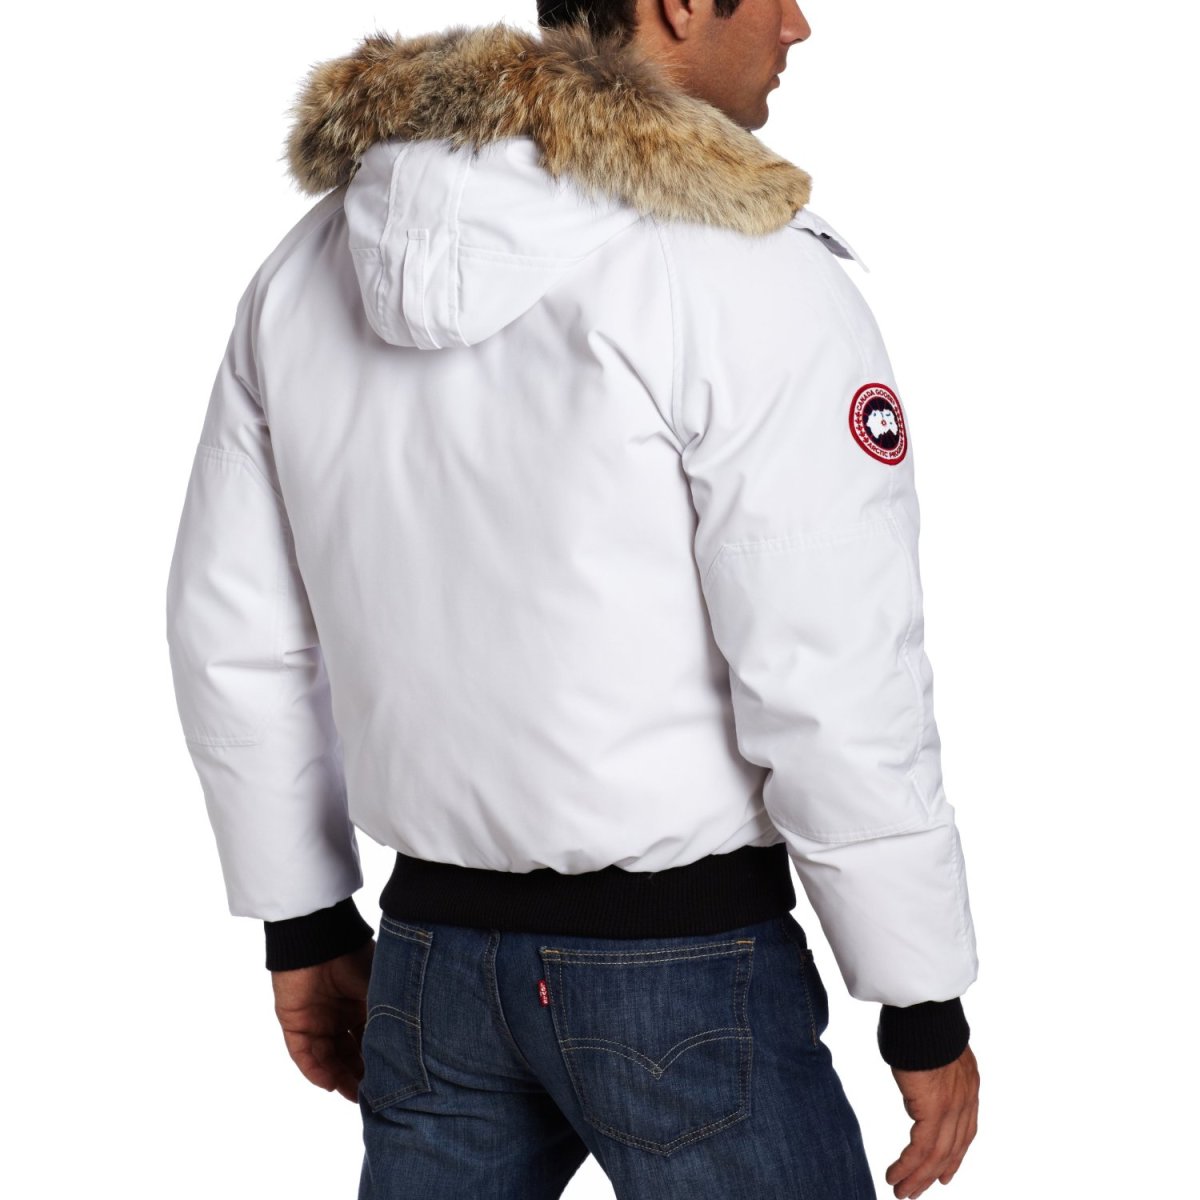 Canada Goose chateau parka online official - A Complete Review Of The Chilliwack Bomber Jacket By Canada Goose